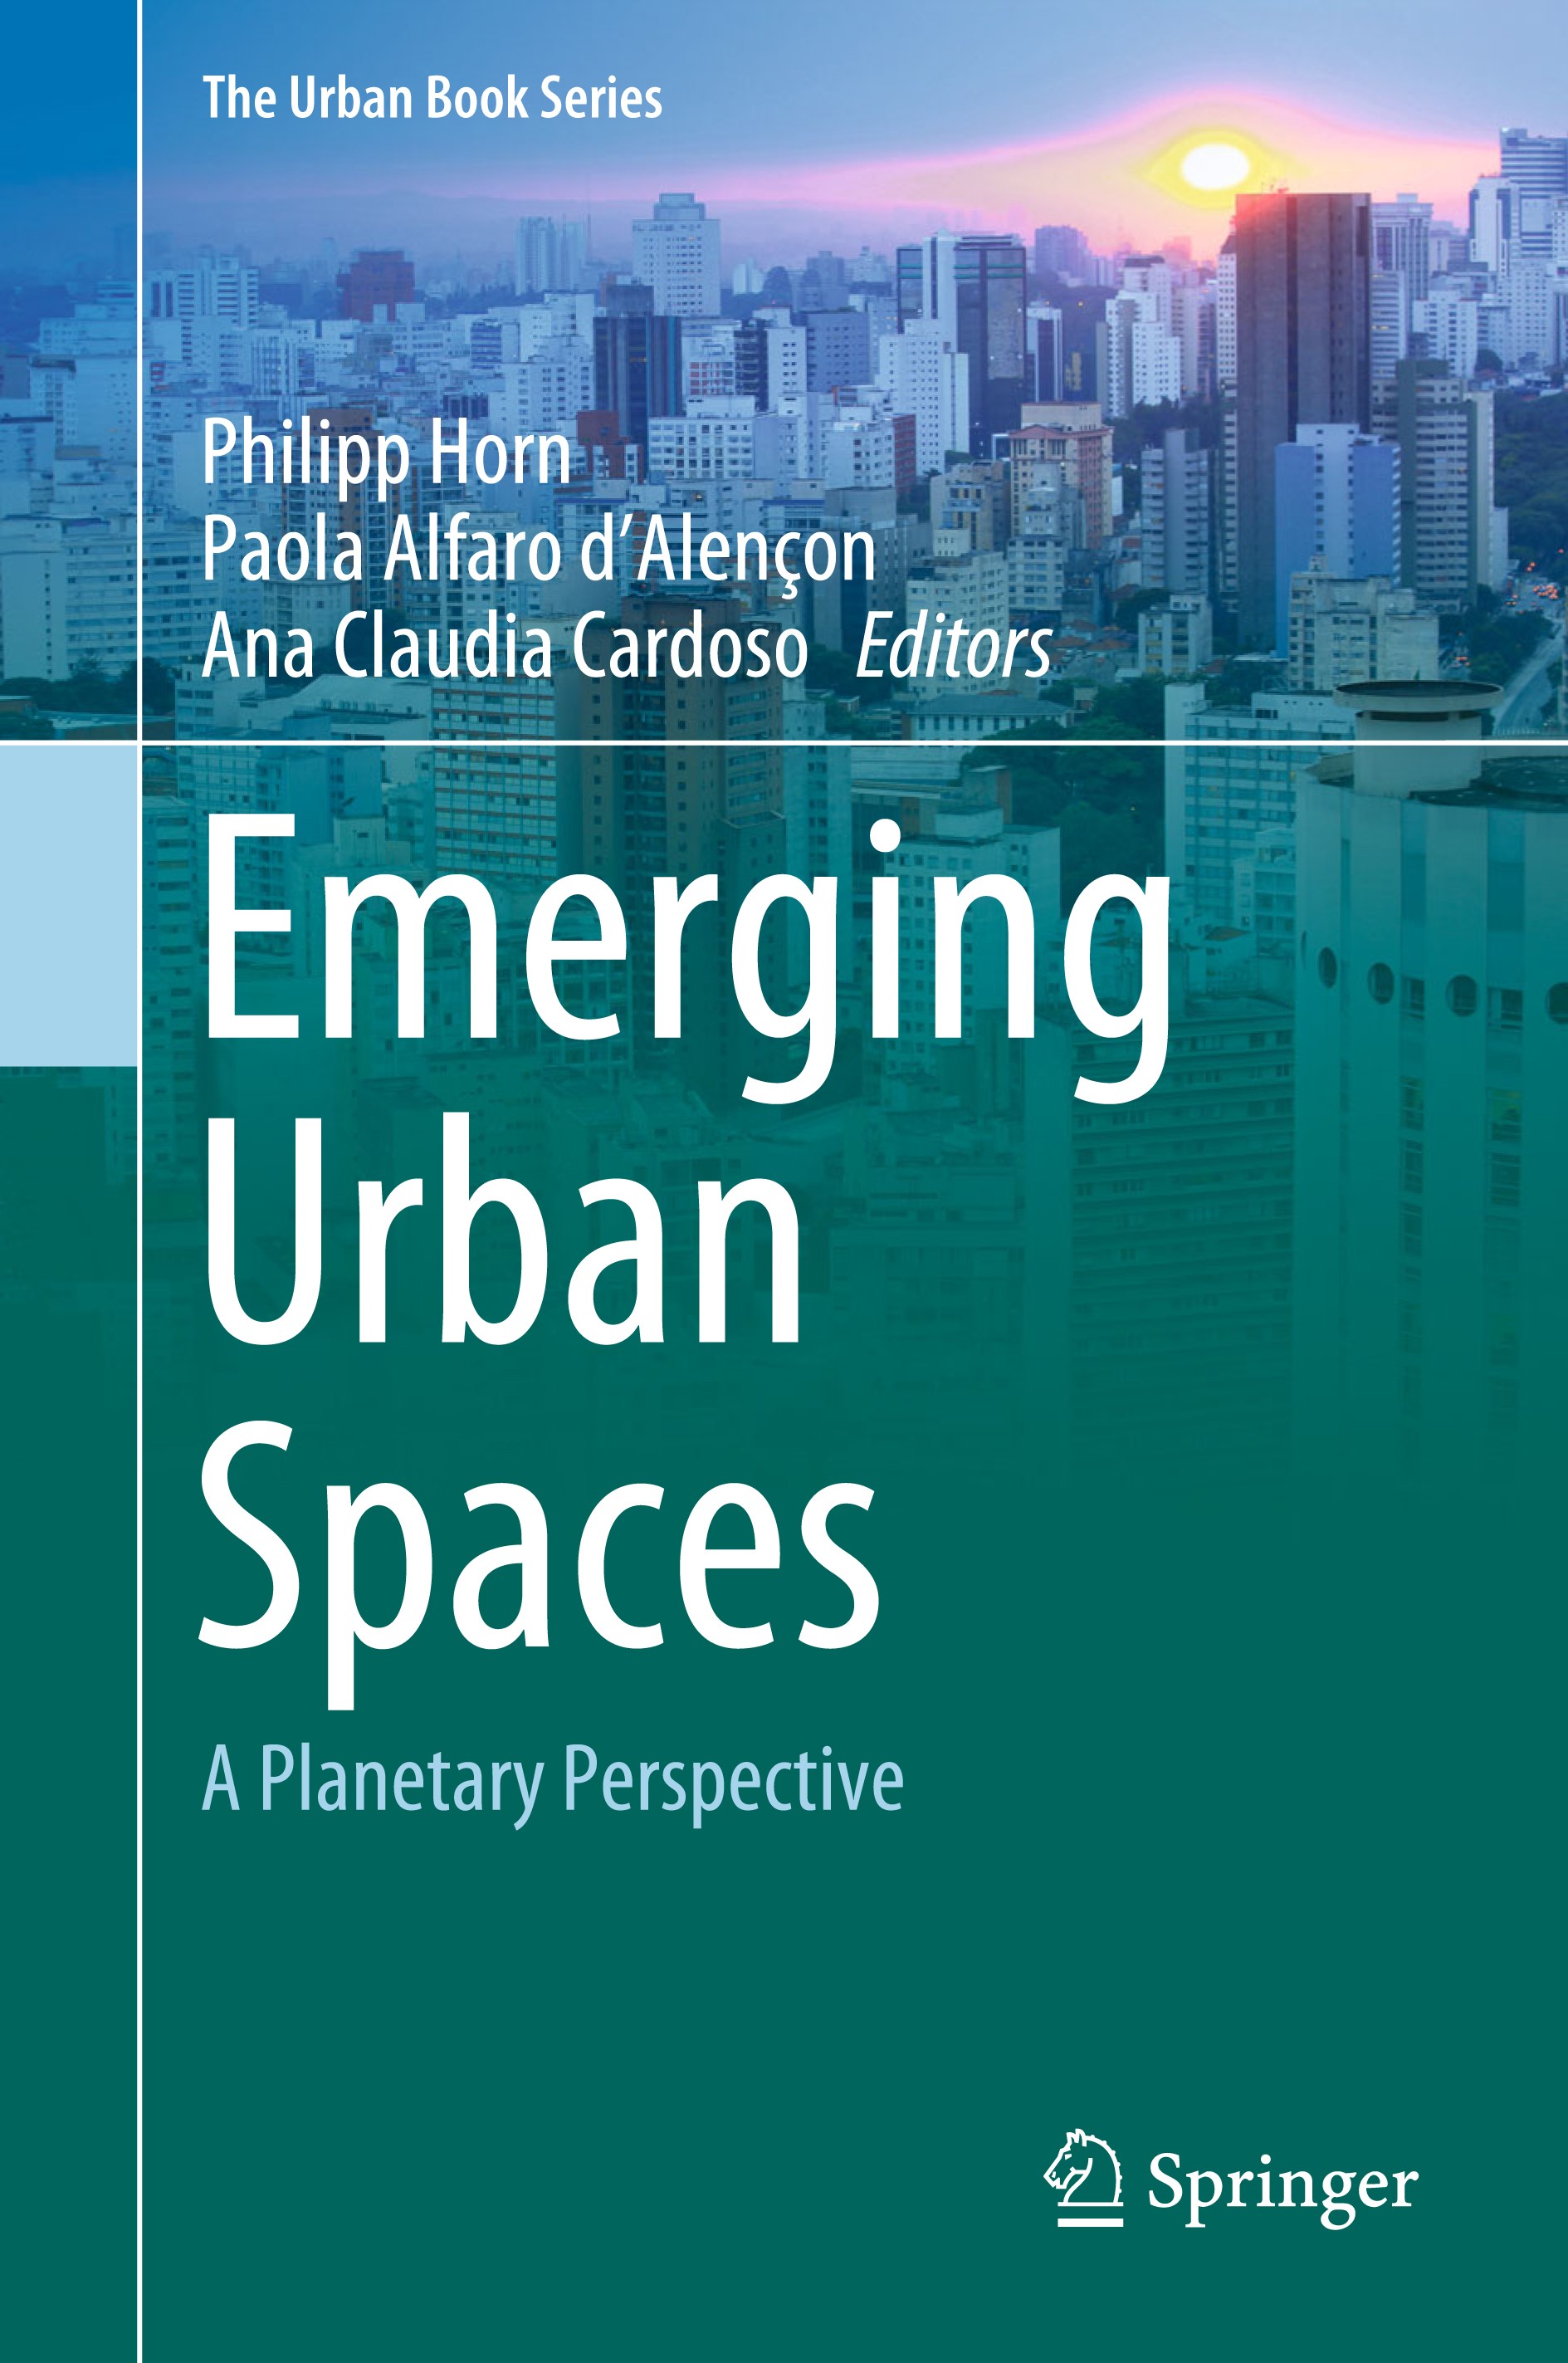 Emerging Urban Indigenous Spaces in Bolivia: A Combined Planetary and  Postcolonial Perspective | SpringerLink